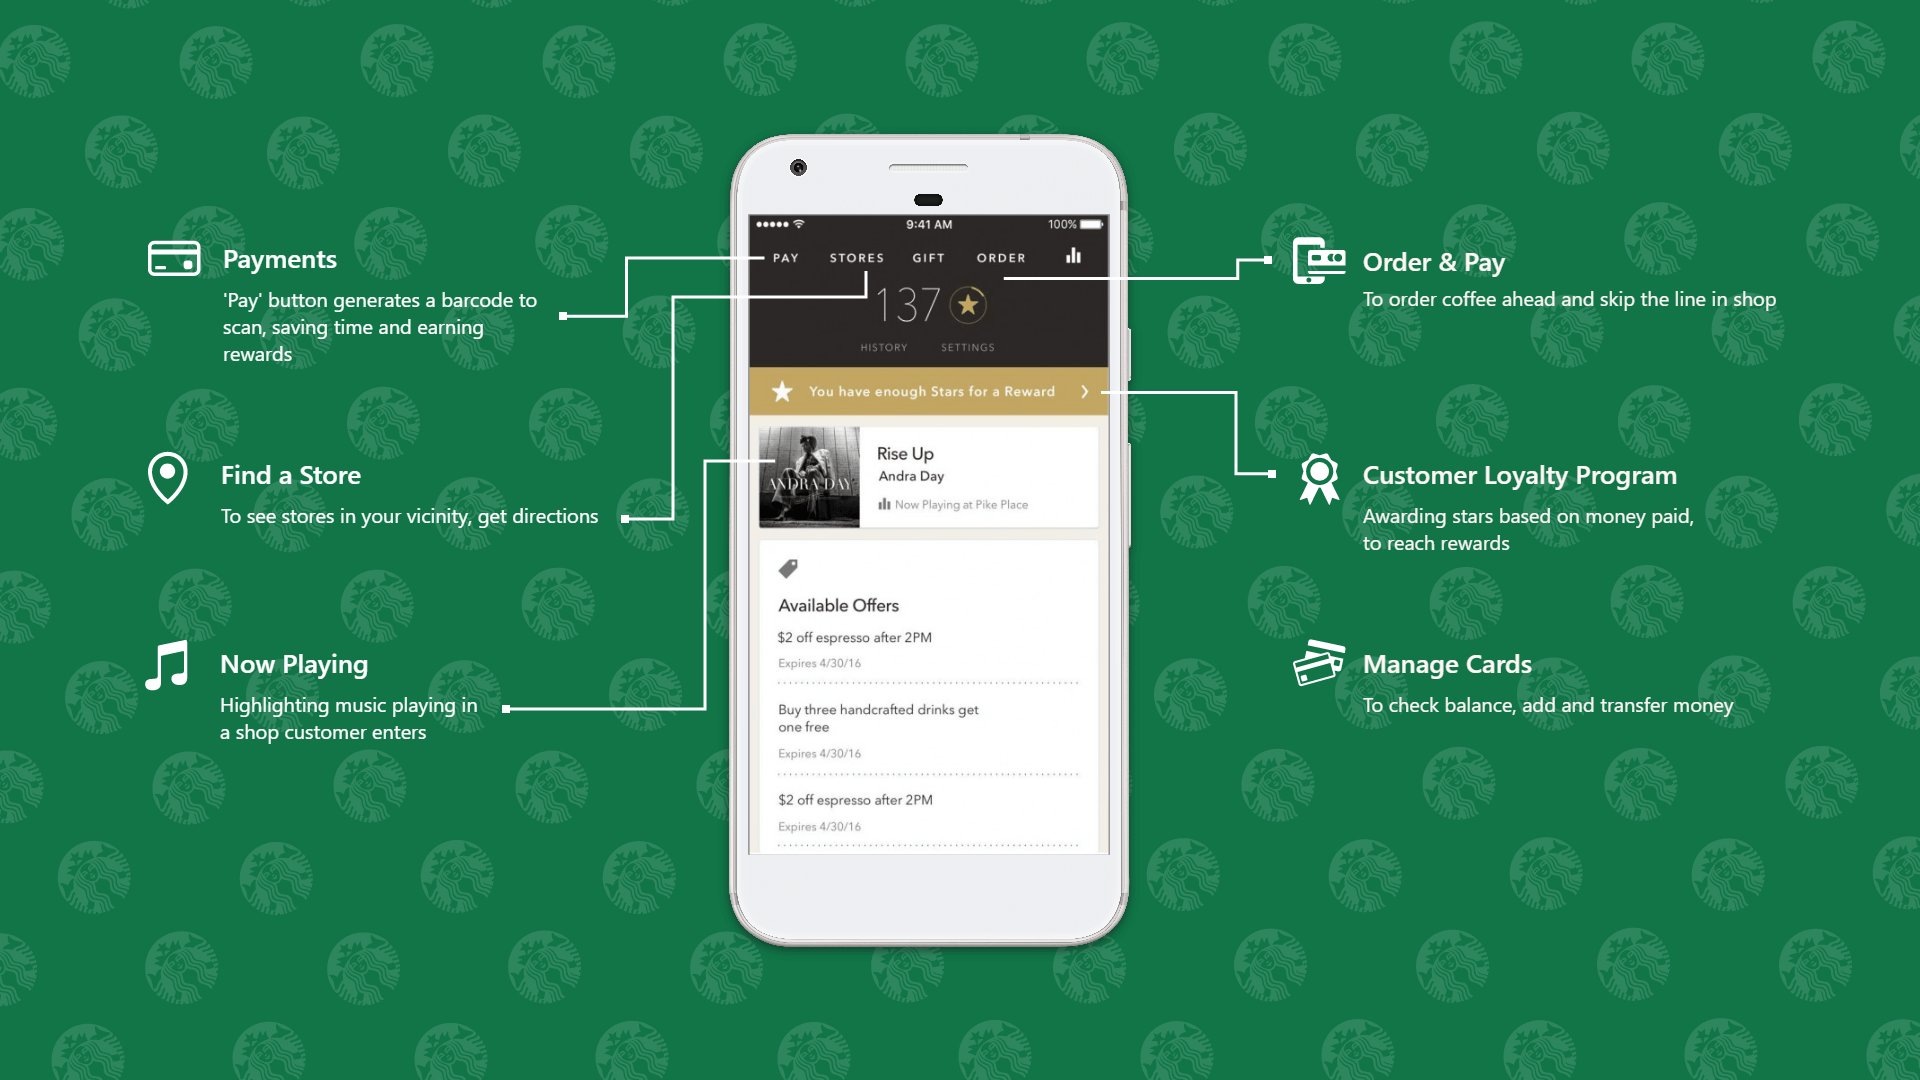 Starbucks mobile app features and cost